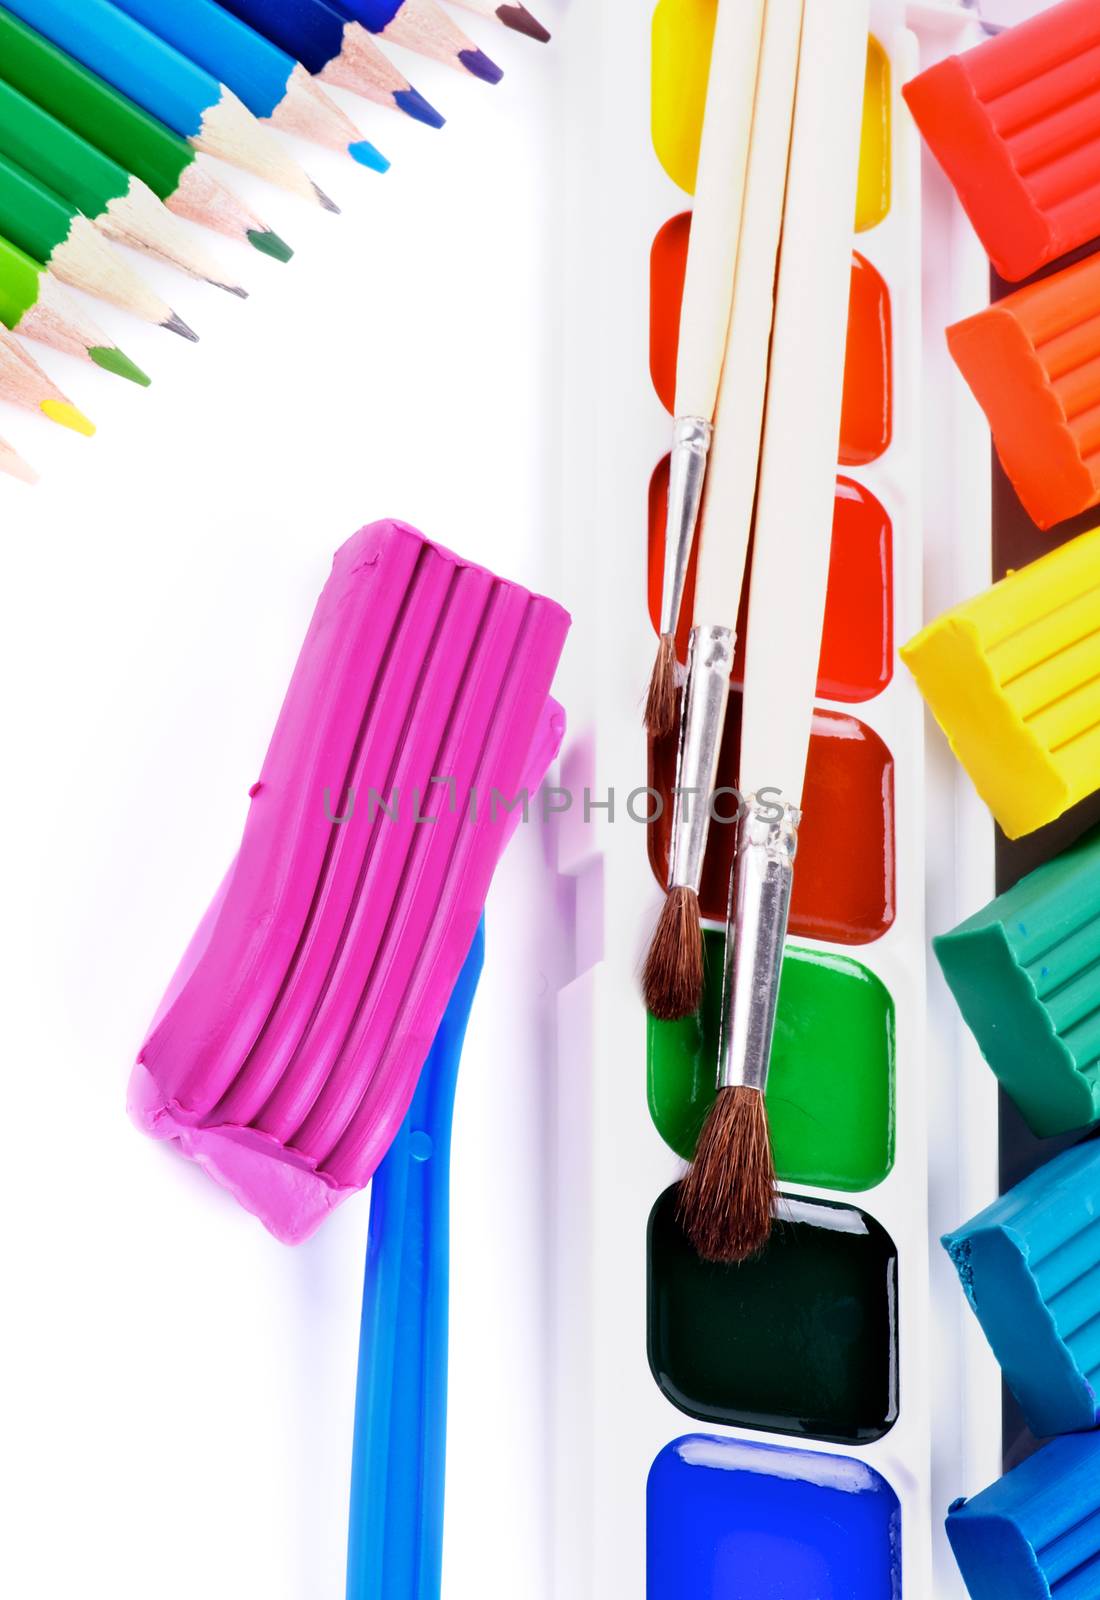 Arrangement of Watercolor Paints, Paint Brushes, Multi Colored Clay and Colored Pencils isolated on White background